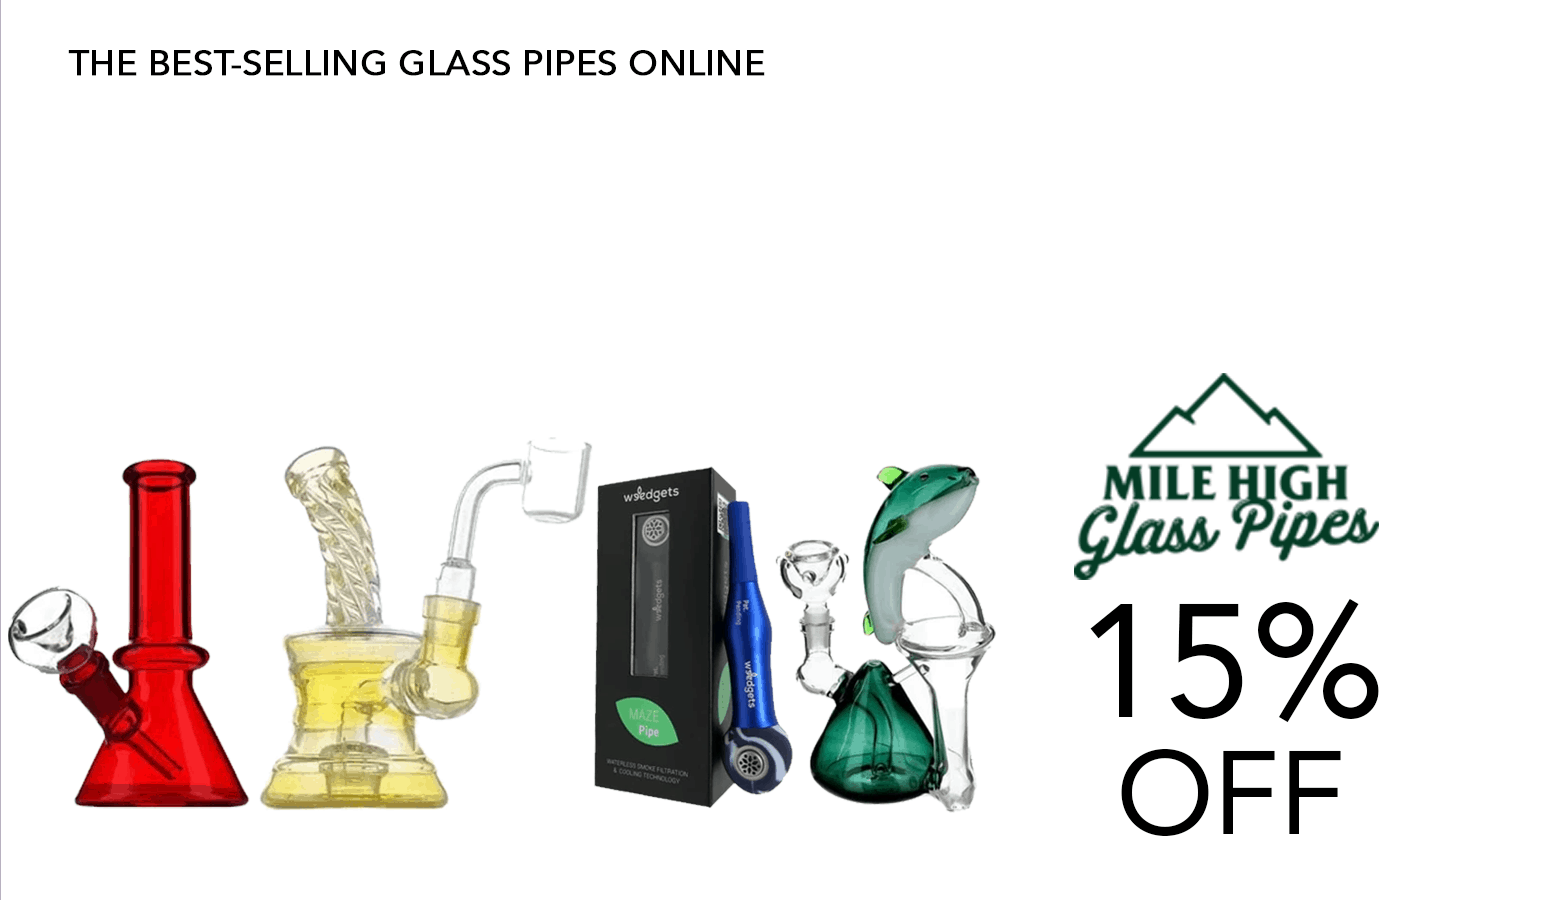 Mile High Glass Pipes Smoking Vape Devices Coupon Code Offer Website